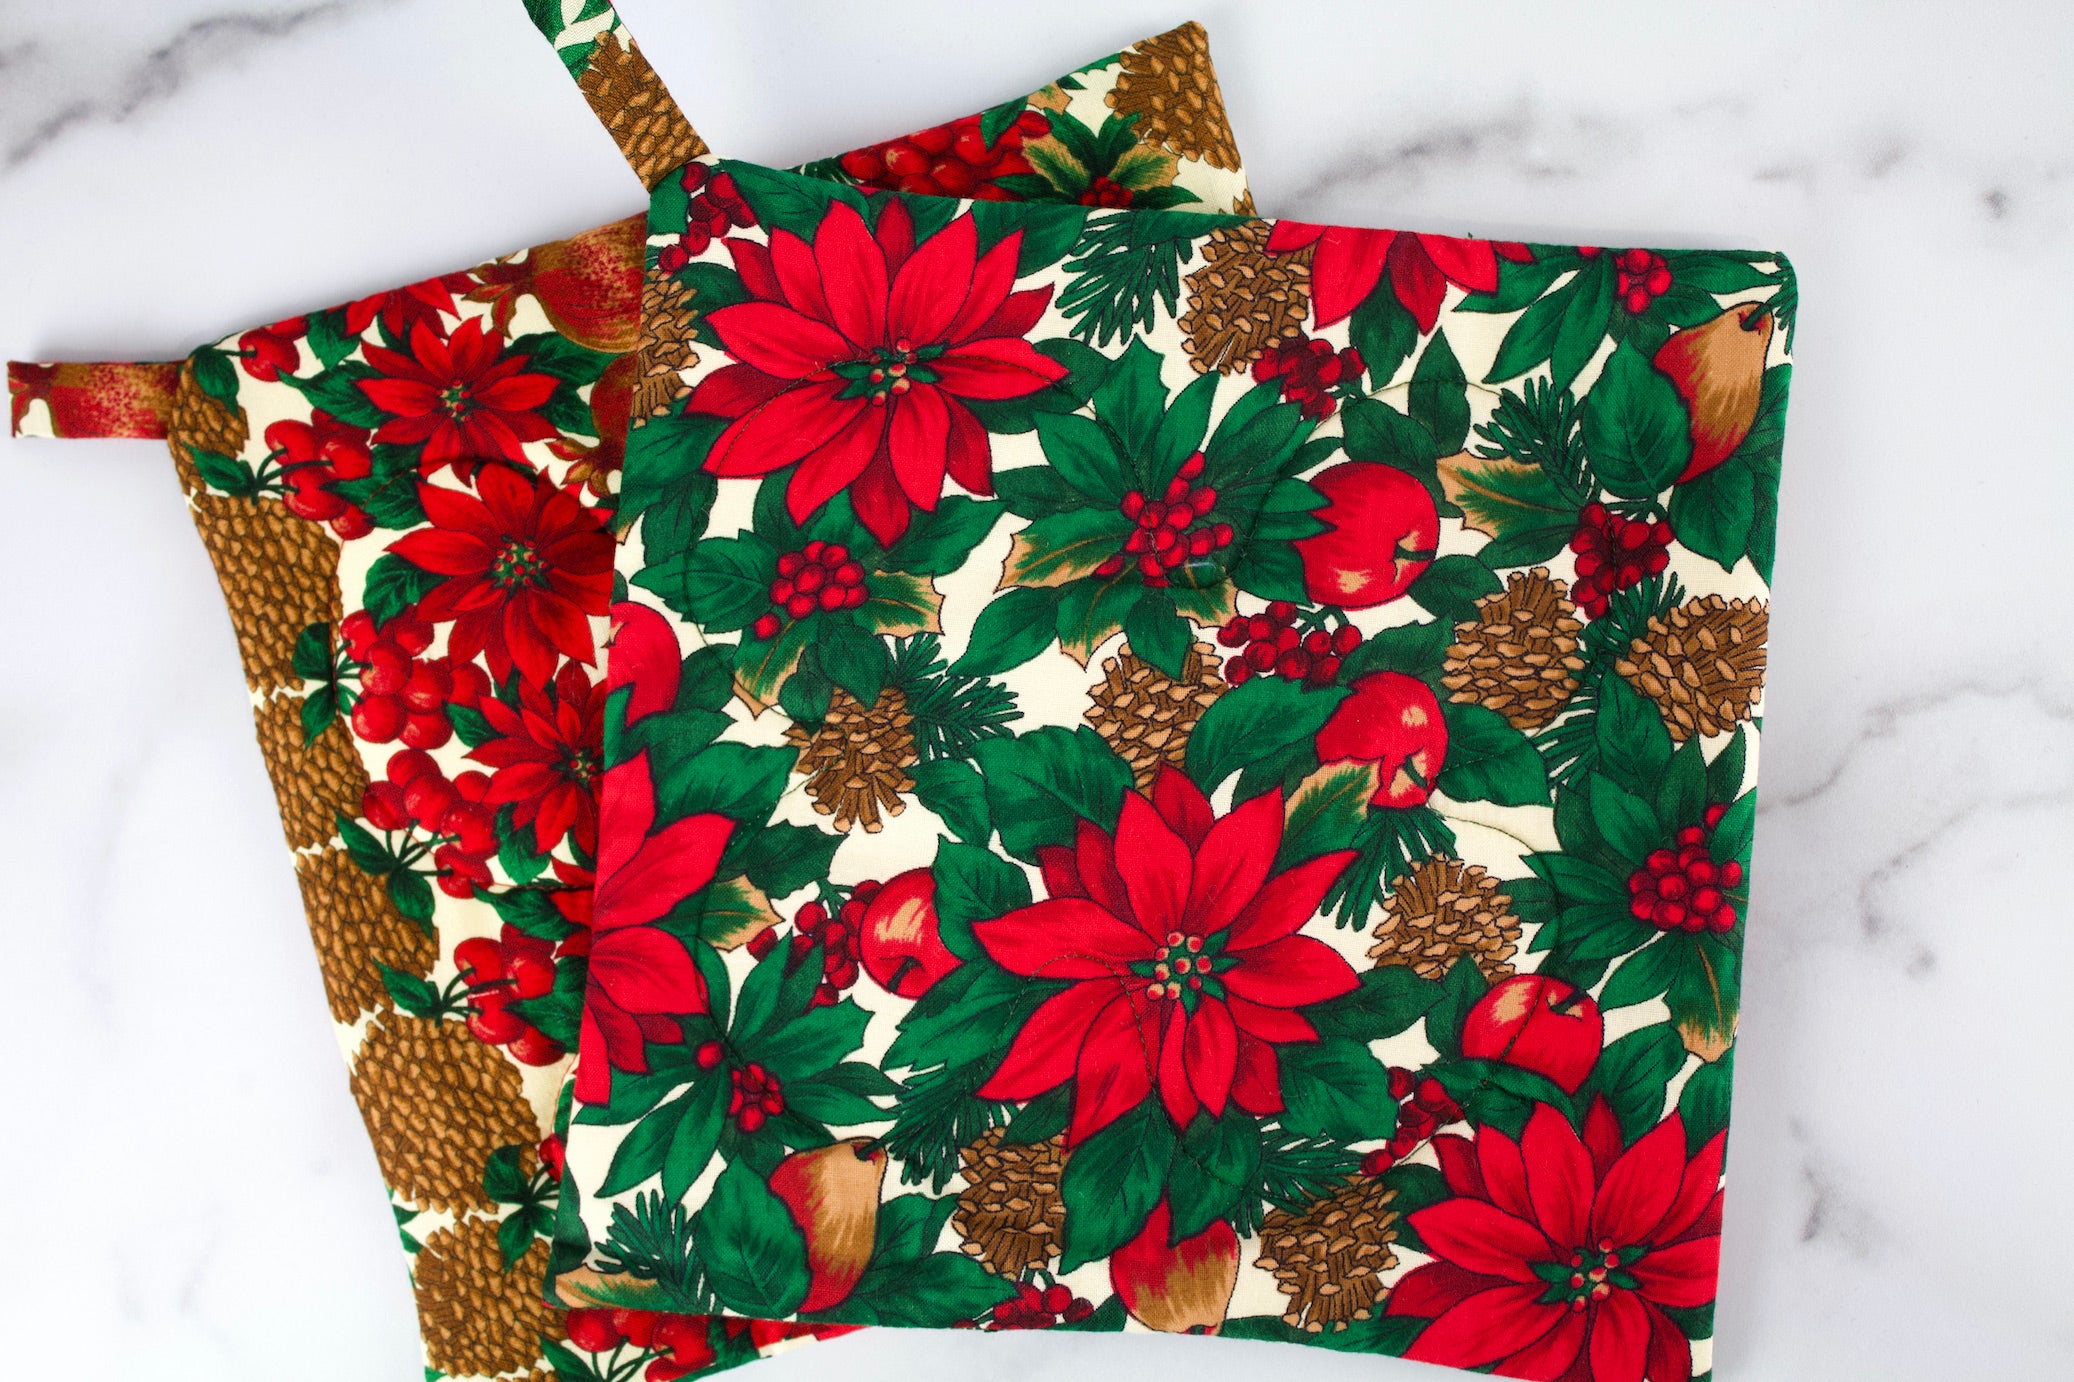 Pinecones and Poinsettias Potholder-The Blue Peony-Category_Pot Holder,Color_Cream,Color_Green,Color_Red,Department_Kitchen,Pattern_Floral,Size_Traditional (Square),Theme_Christmas,Theme_Winter,Theme_Woodland